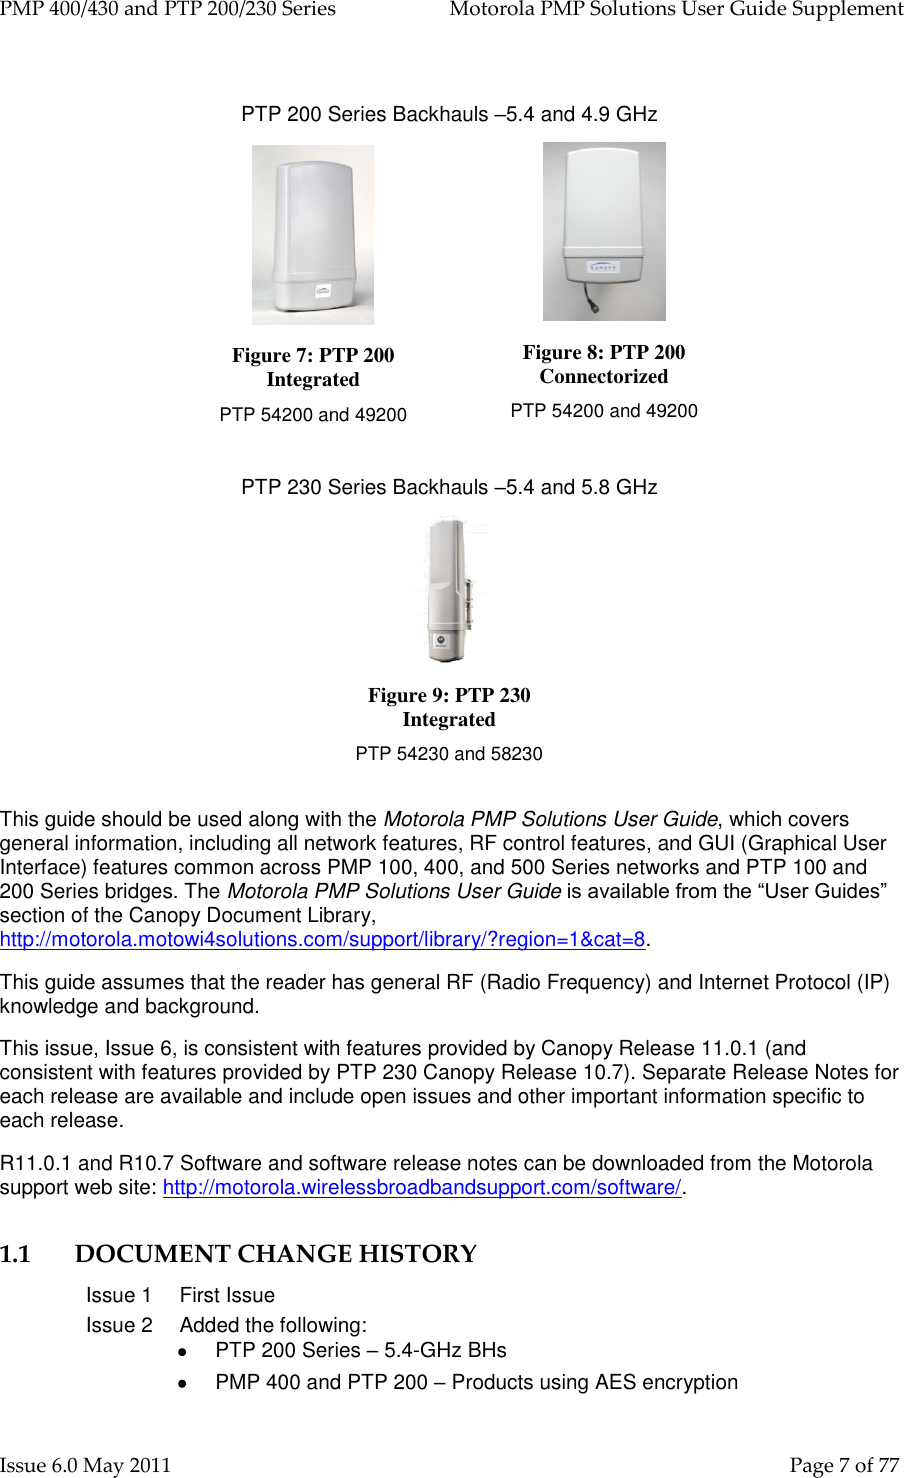 PMP 400/430 and PTP 200/230 Series   Motorola PMP Solutions User Guide Supplement Issue 6.0 May 2011    Page 7 of 77  PTP 200 Series Backhauls –5.4 and 4.9 GHz  Figure 7: PTP 200 Integrated PTP 54200 and 49200                            Figure 8: PTP 200 Connectorized PTP 54200 and 49200  PTP 230 Series Backhauls –5.4 and 5.8 GHz  Figure 9: PTP 230 Integrated PTP 54230 and 58230                            This guide should be used along with the Motorola PMP Solutions User Guide, which covers general information, including all network features, RF control features, and GUI (Graphical User Interface) features common across PMP 100, 400, and 500 Series networks and PTP 100 and 200 Series bridges. The Motorola PMP Solutions User Guide is available from the “User Guides” section of the Canopy Document Library, http://motorola.motowi4solutions.com/support/library/?region=1&amp;cat=8. This guide assumes that the reader has general RF (Radio Frequency) and Internet Protocol (IP) knowledge and background. This issue, Issue 6, is consistent with features provided by Canopy Release 11.0.1 (and consistent with features provided by PTP 230 Canopy Release 10.7). Separate Release Notes for each release are available and include open issues and other important information specific to each release. R11.0.1 and R10.7 Software and software release notes can be downloaded from the Motorola support web site: http://motorola.wirelessbroadbandsupport.com/software/. 1.1 DOCUMENT CHANGE HISTORY Issue 1 First Issue Issue 2 Added the following:   PTP 200 Series – 5.4-GHz BHs   PMP 400 and PTP 200 – Products using AES encryption 